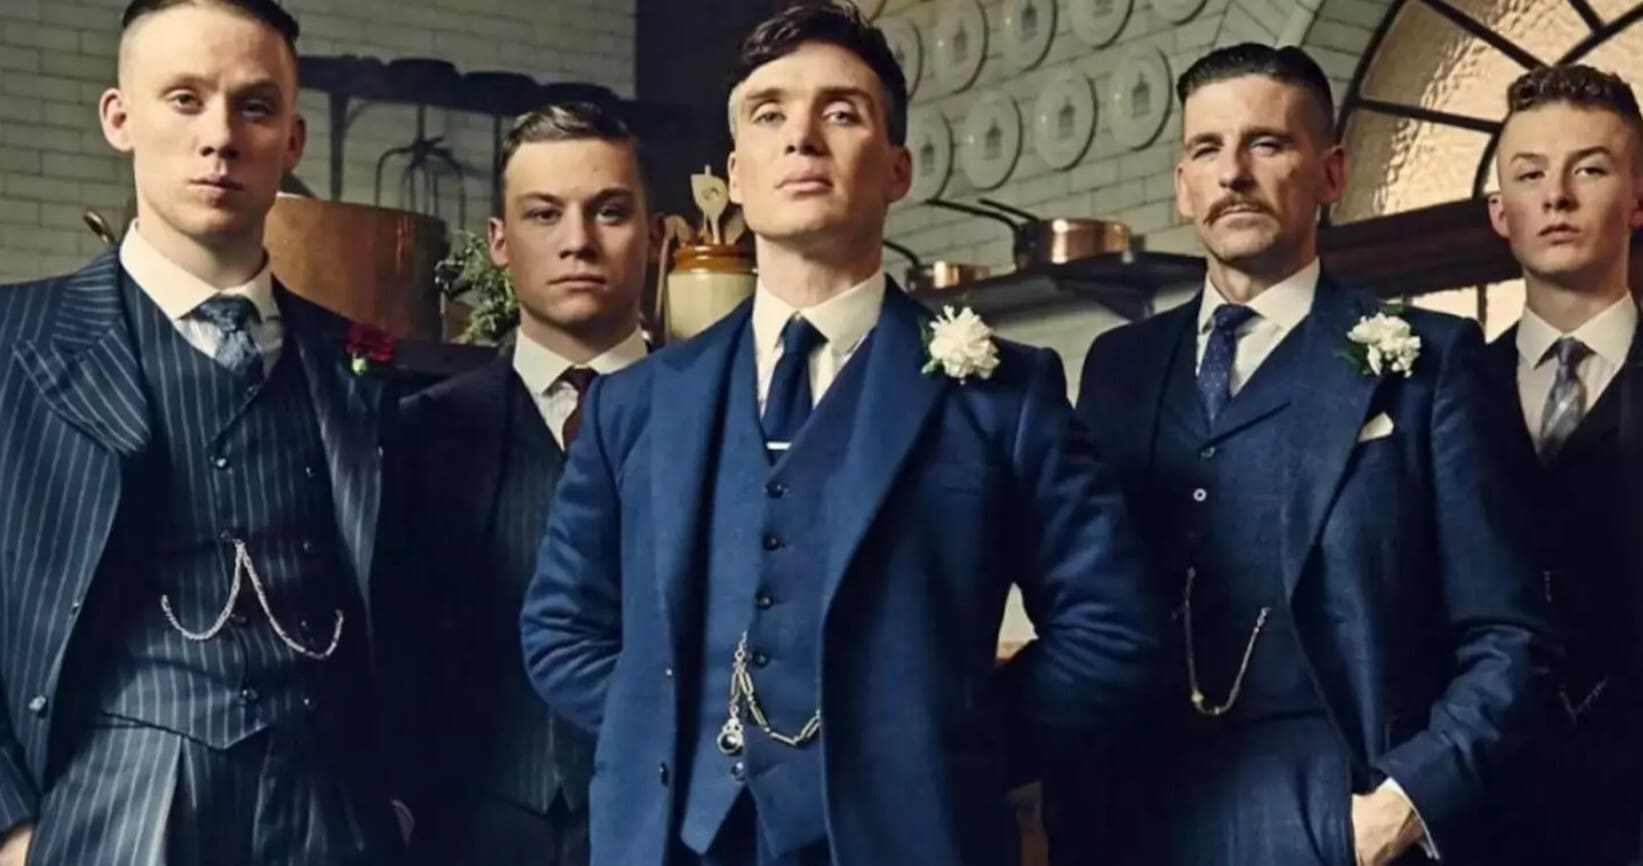 Netflix Officially Confirms Peaky Blinders Movie With Cillian Murphy Returning as Tommy Shelby